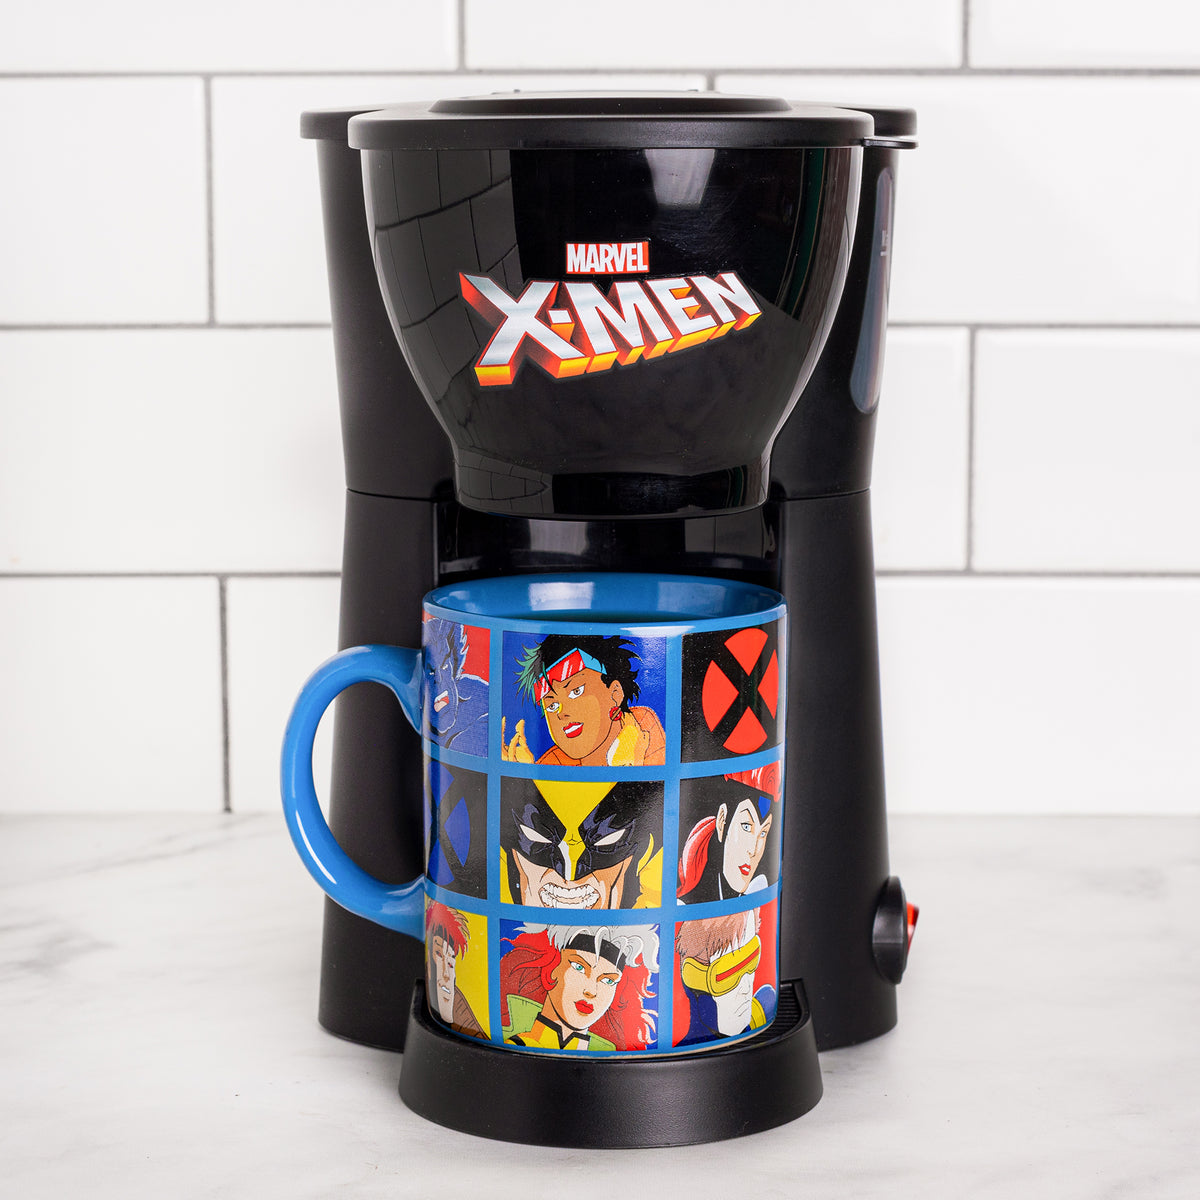 Uncanny Brands Spider-Man Single Cup Coffee Maker with Mug - 20235905